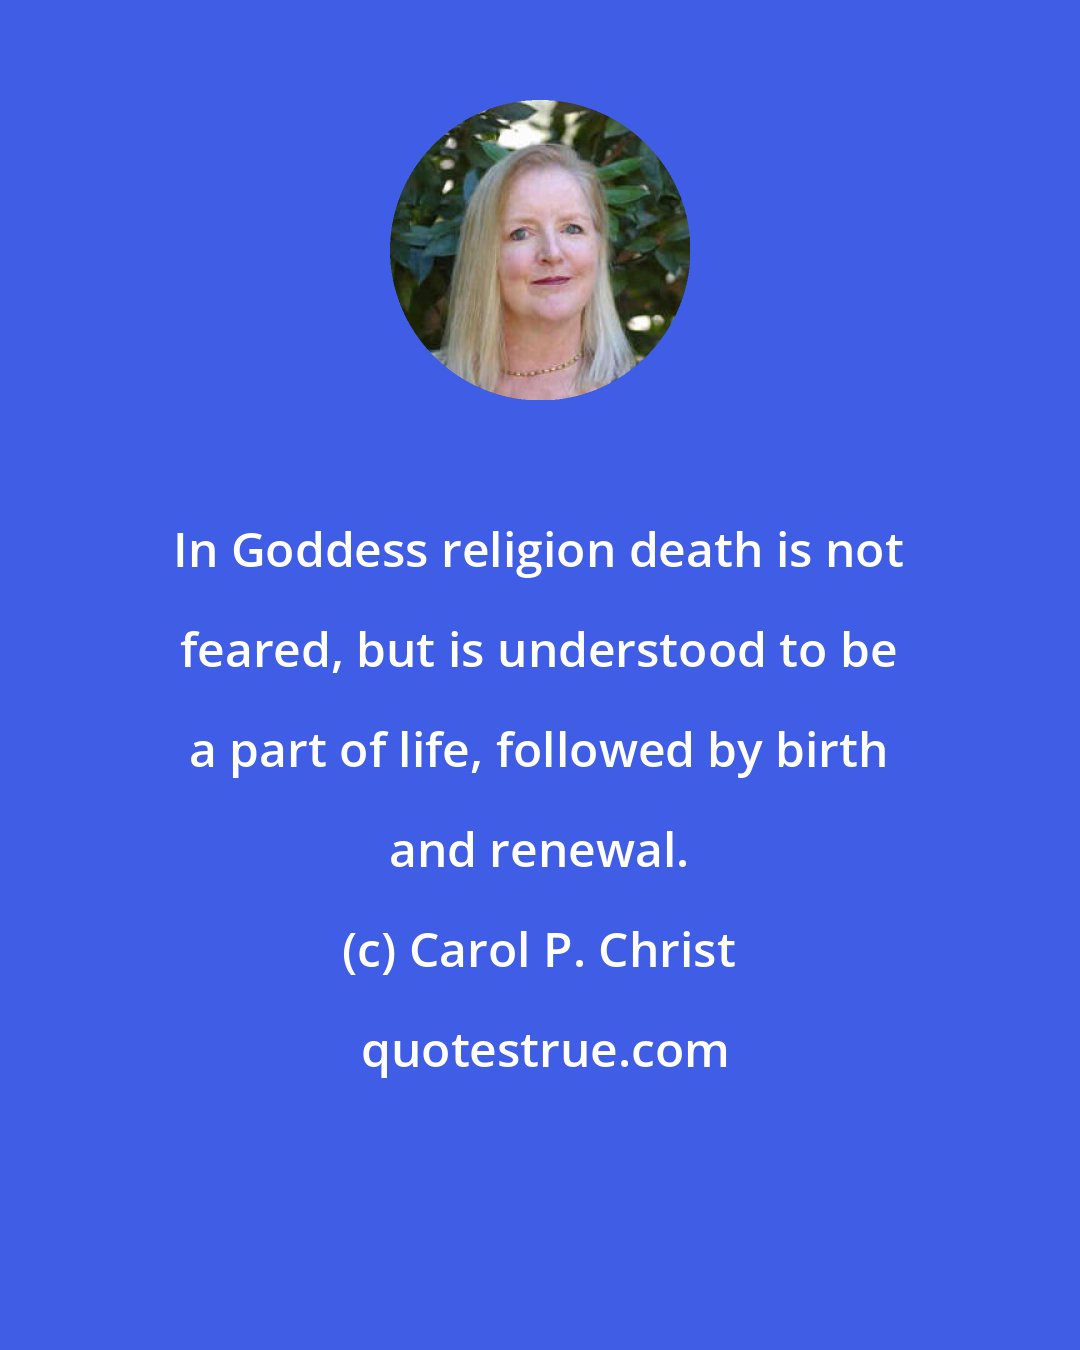 Carol P. Christ: In Goddess religion death is not feared, but is understood to be a part of life, followed by birth and renewal.